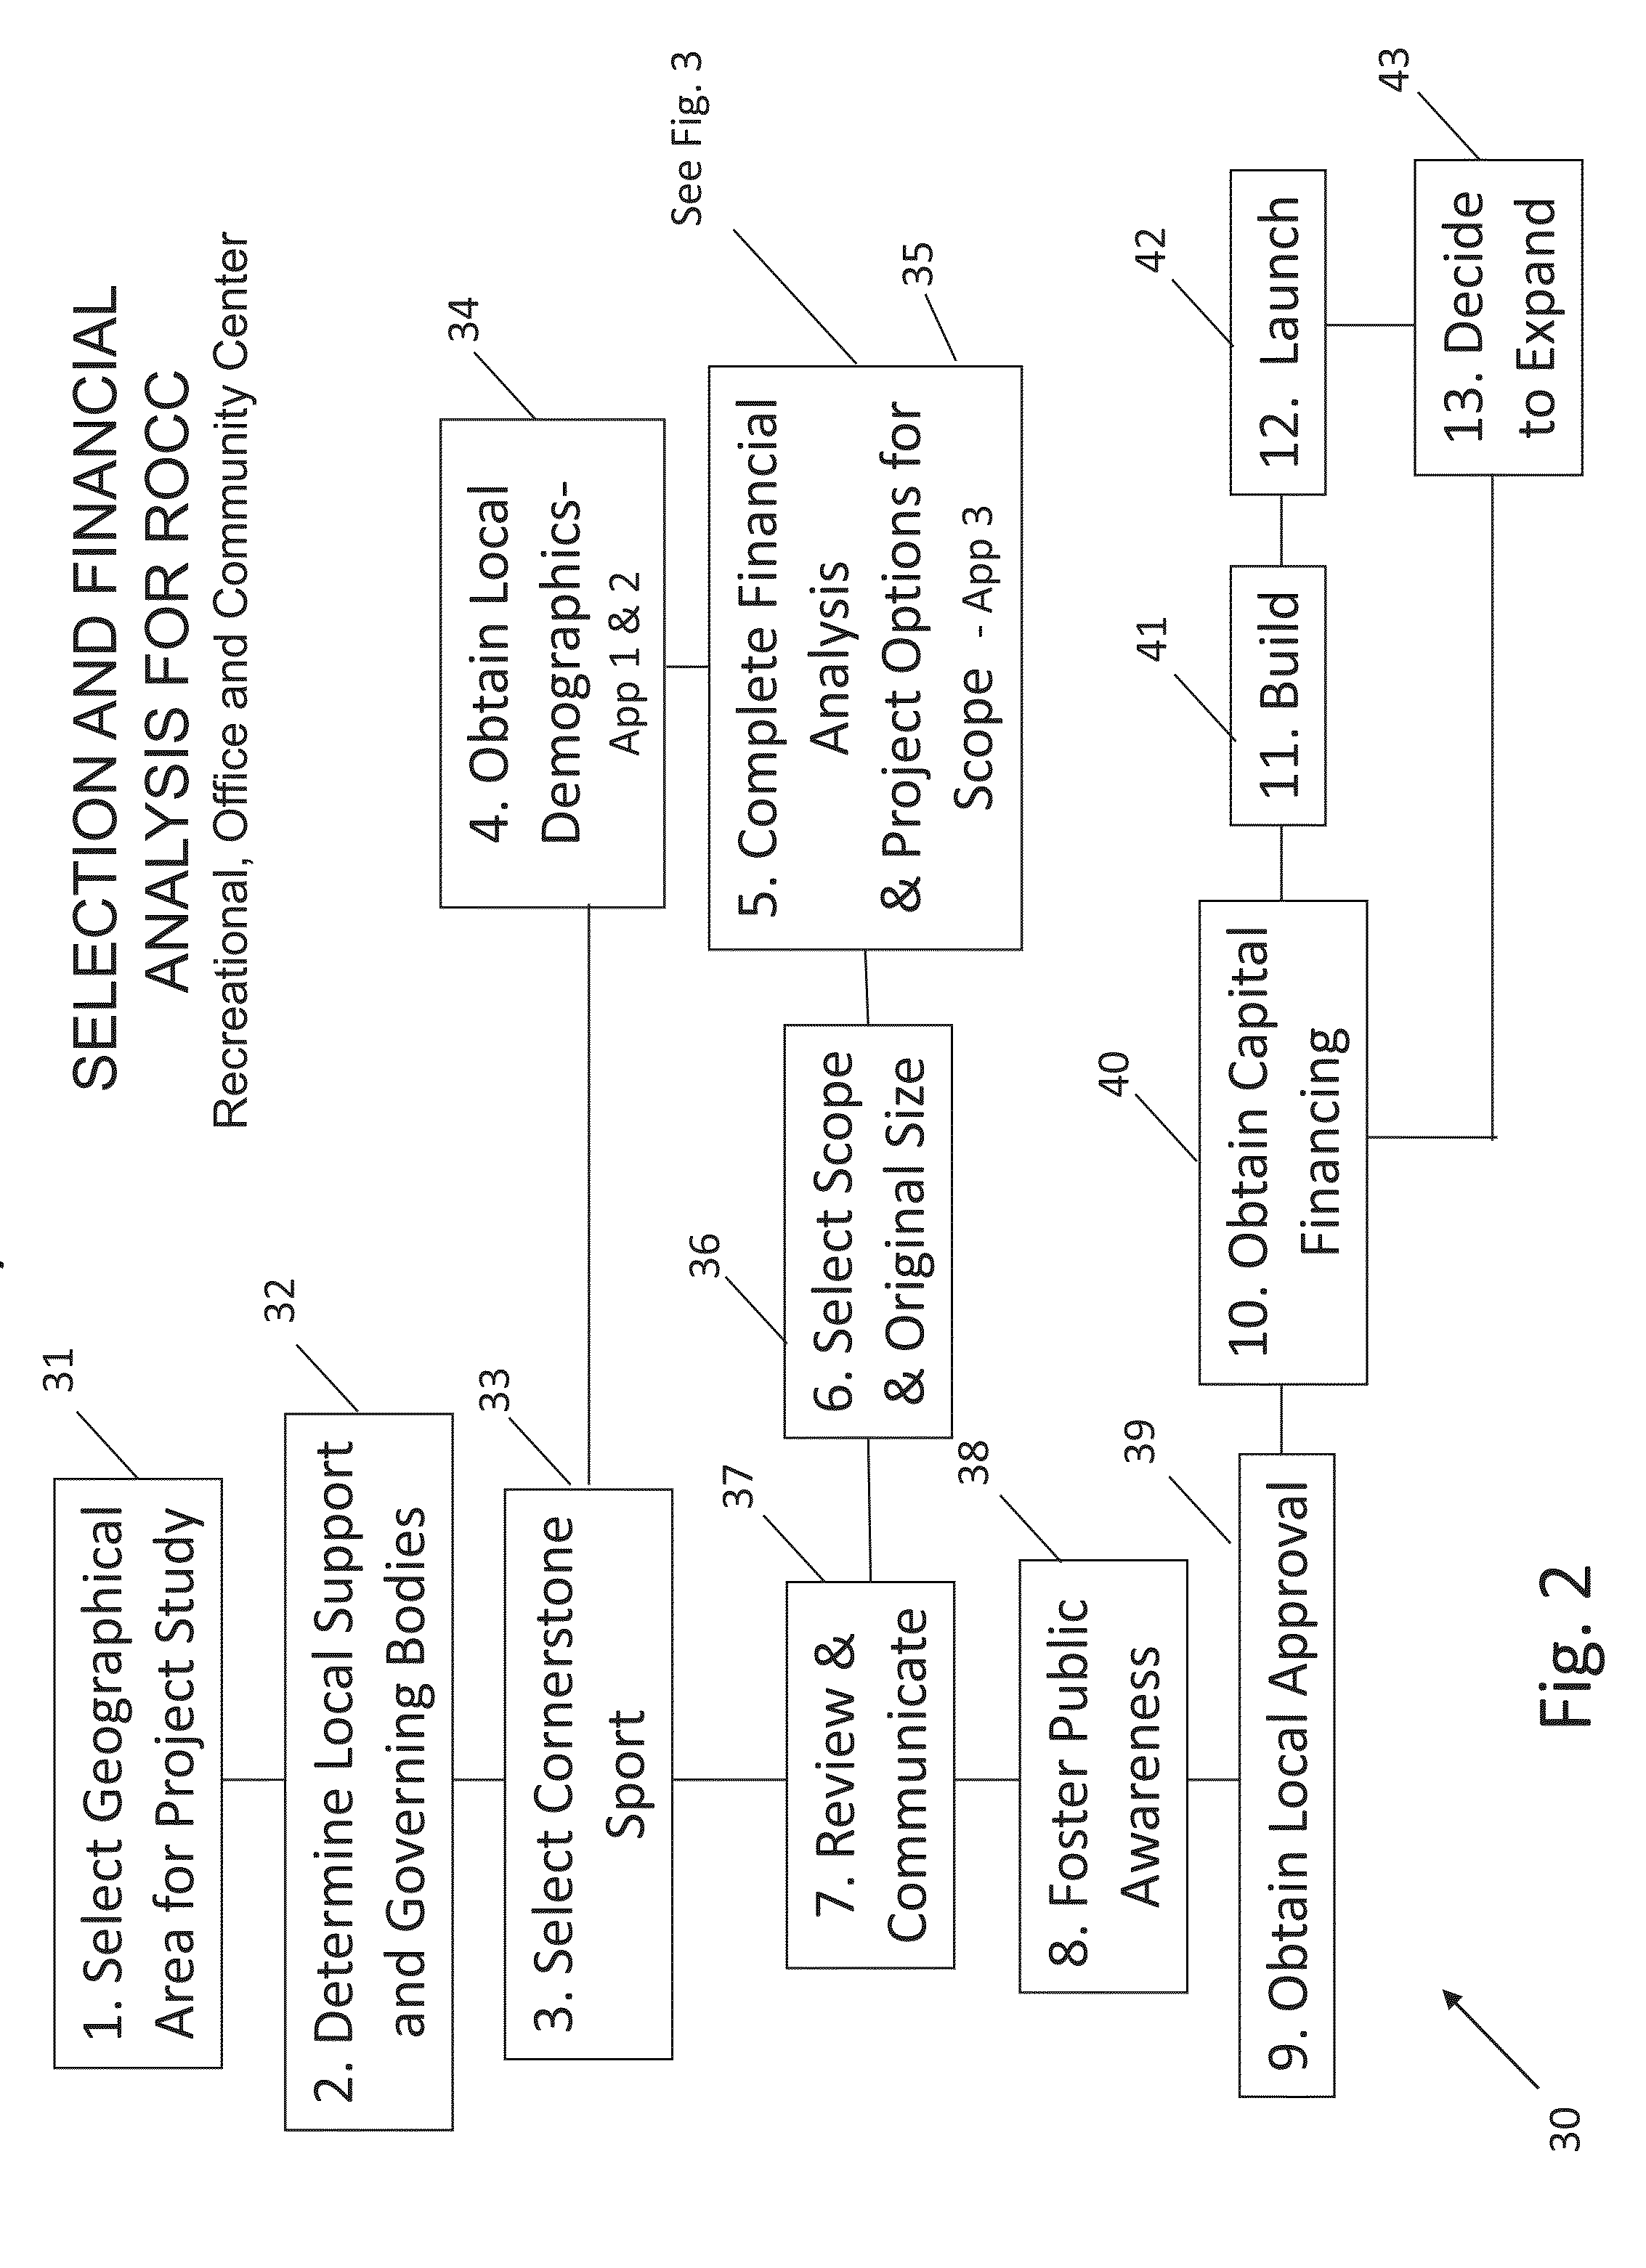 Business Method Patent for determining the Financial Viability of Constructing a Recreation Center and a Flexible Commercial Center known as the ROCC